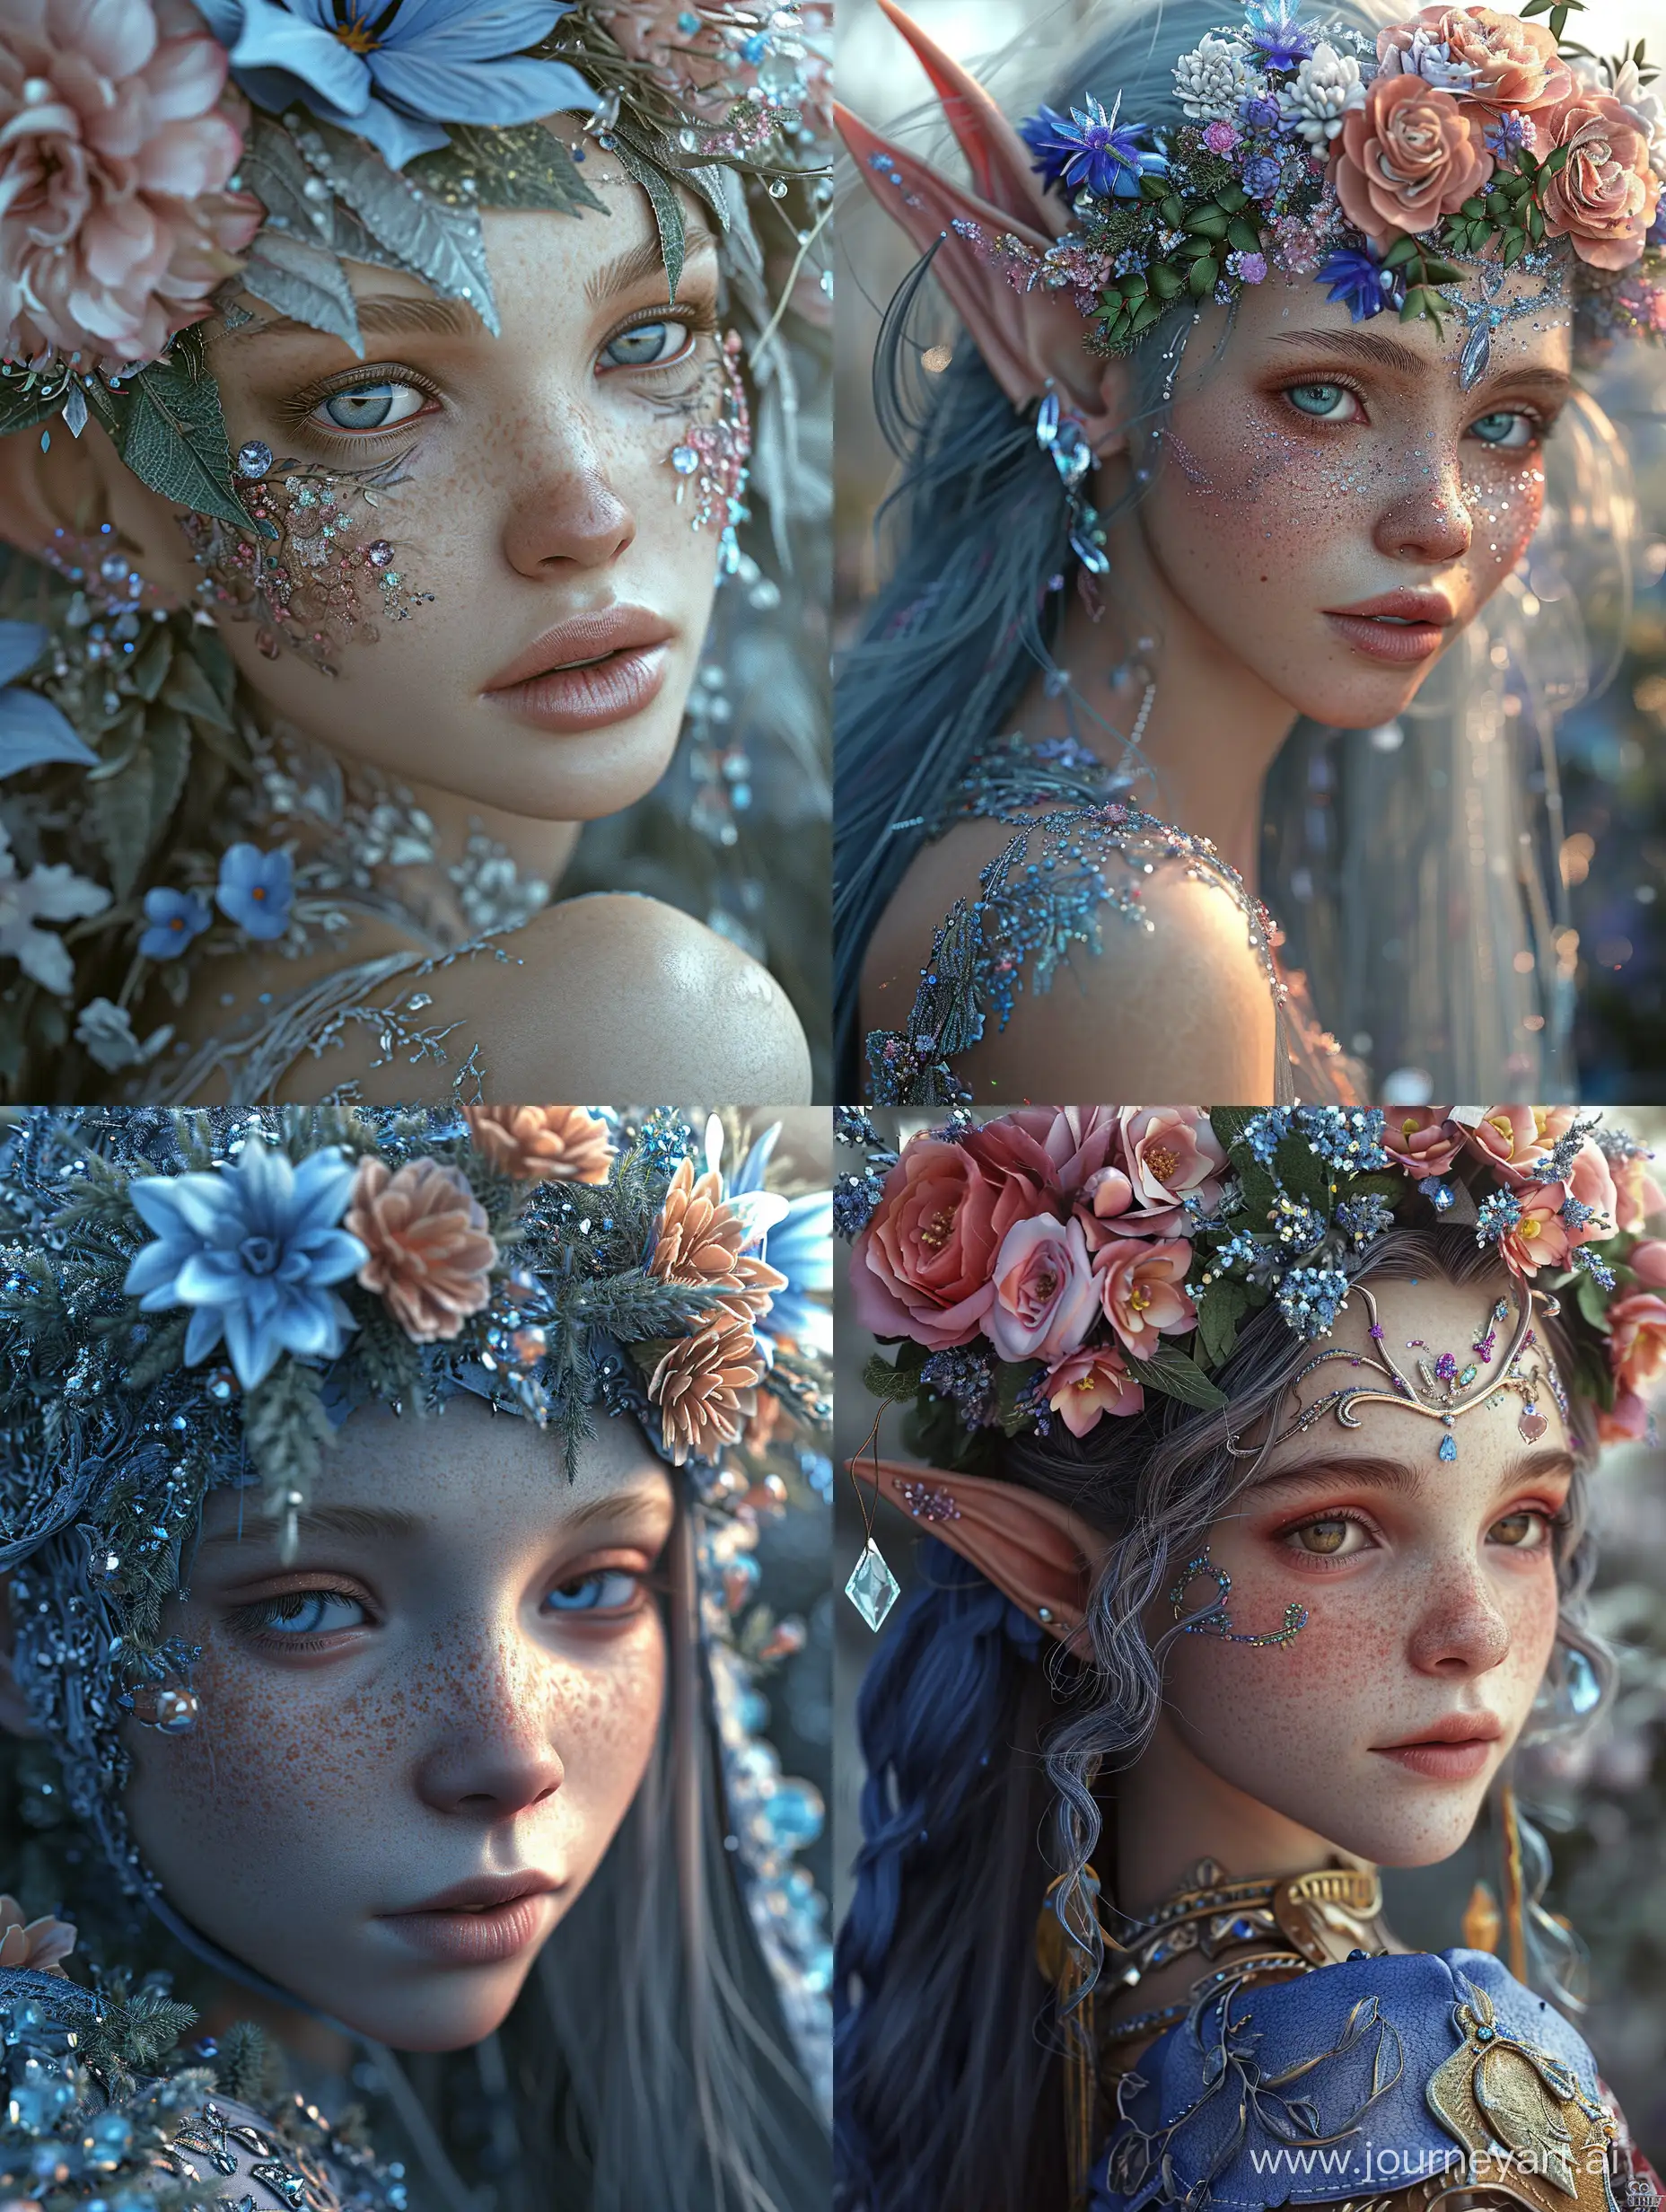 Enchanting-Blue-Elf-with-Intricate-Floral-Crown-Fantasy-Art